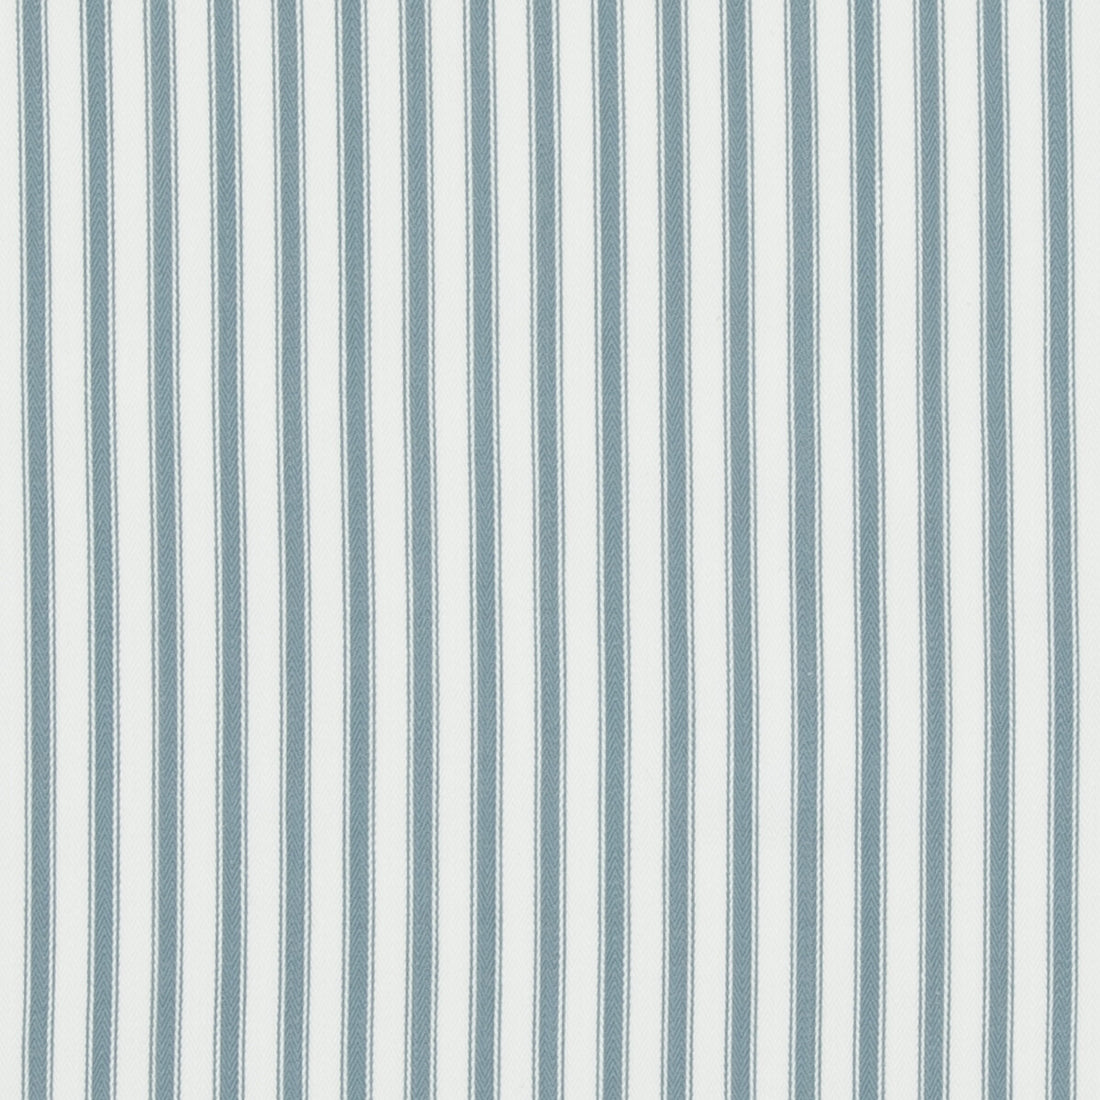 Sherborne Ticking fabric in aqua color - pattern PF50505.725.0 - by Baker Lifestyle in the Bridport collection